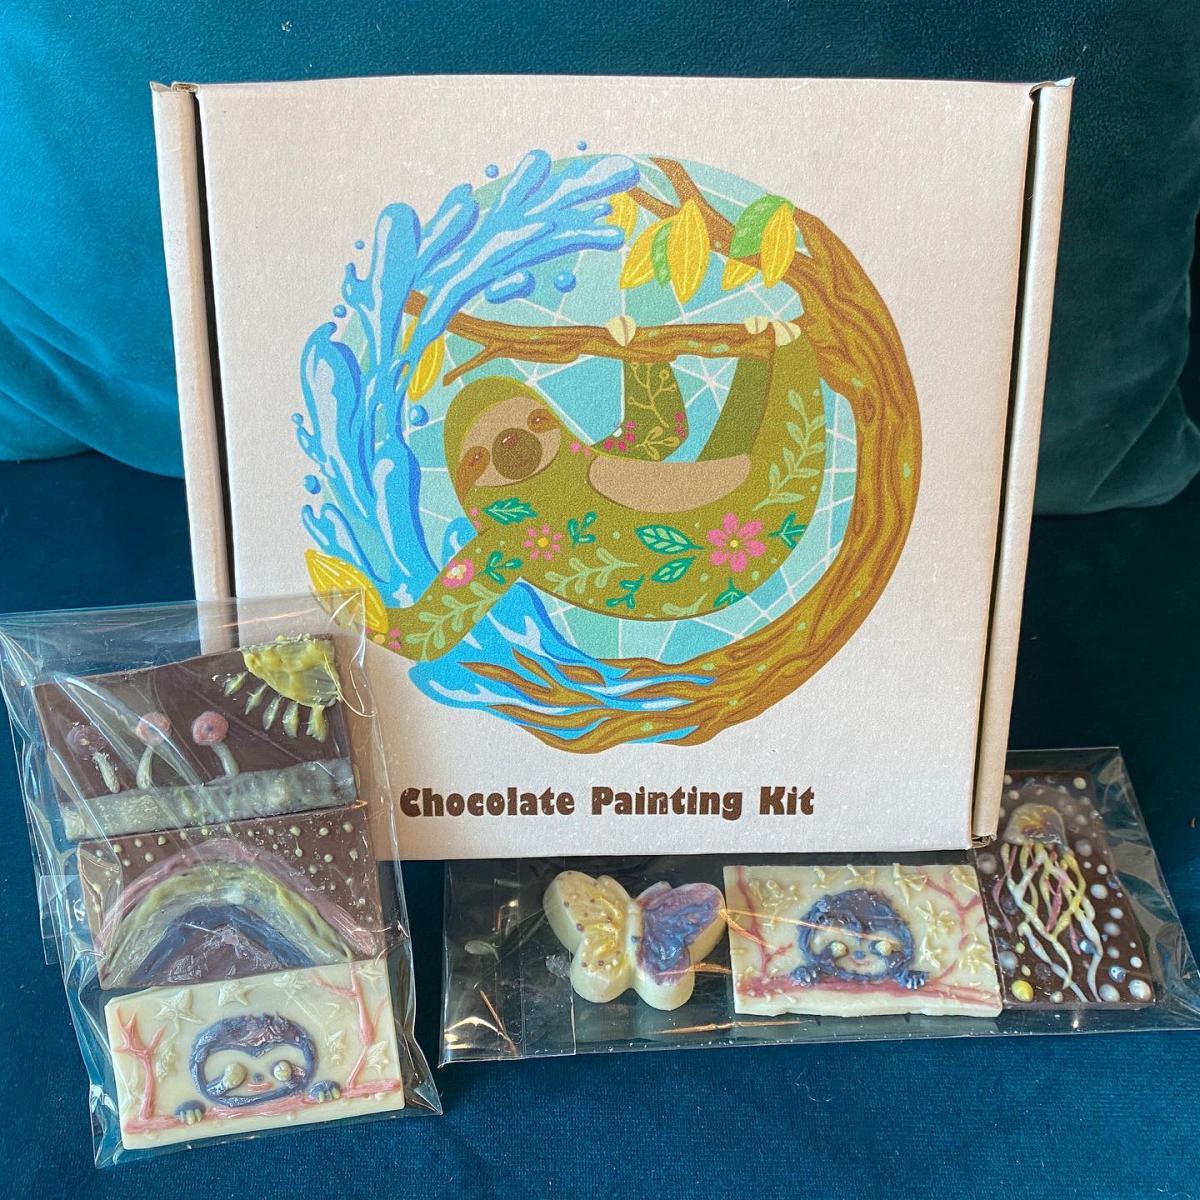 Chocolate Painting Kit from River-Sea Chocolates